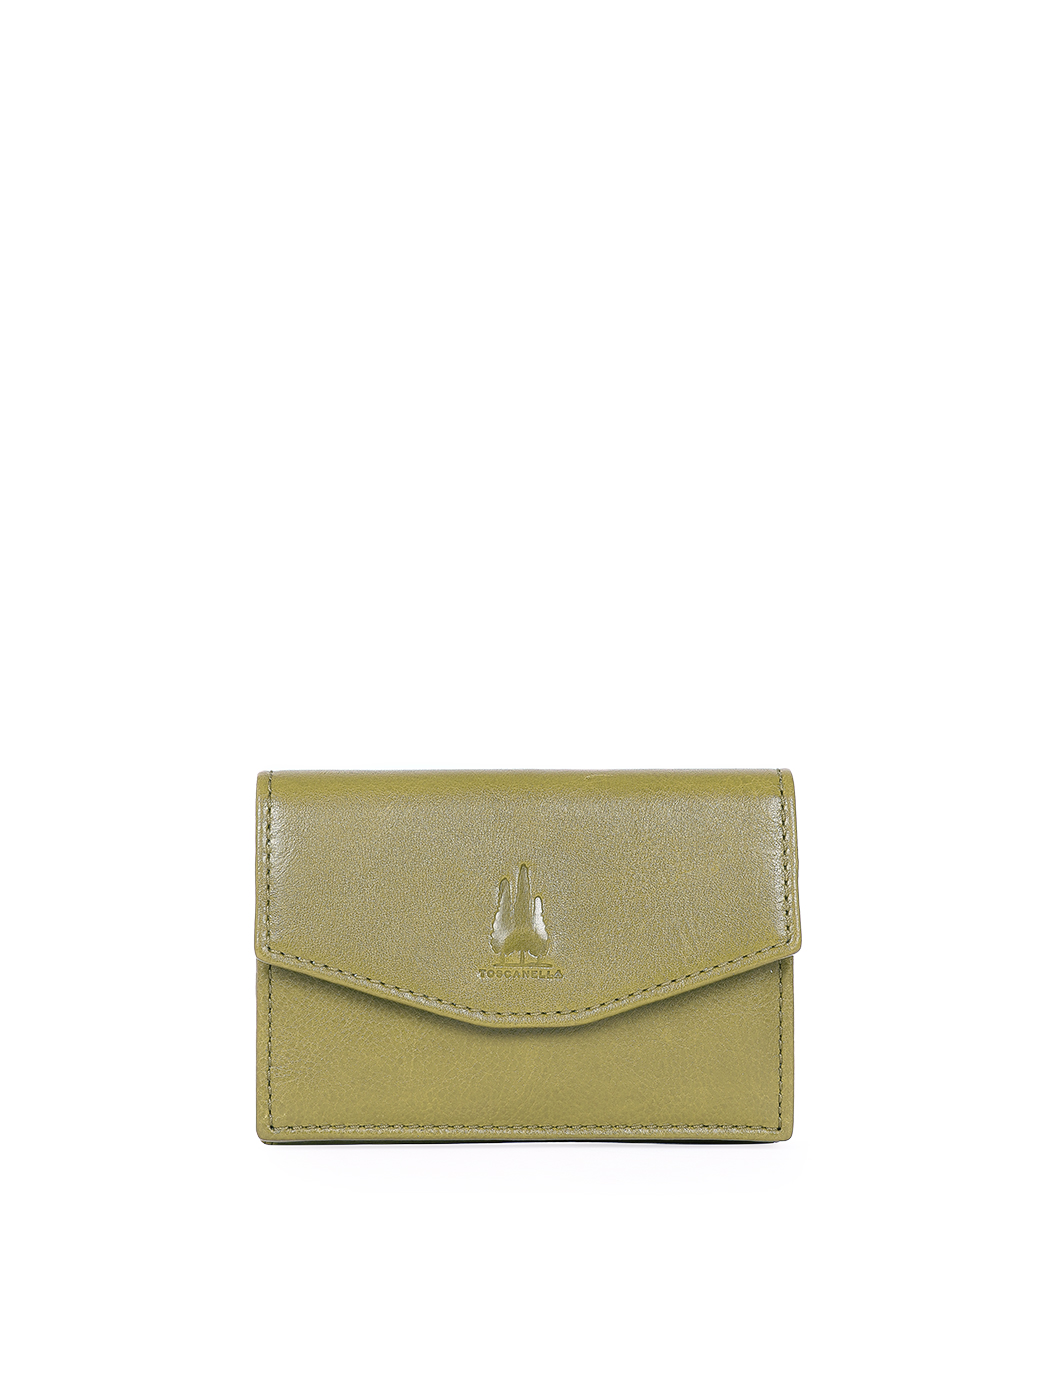 Card Case with button Olive green